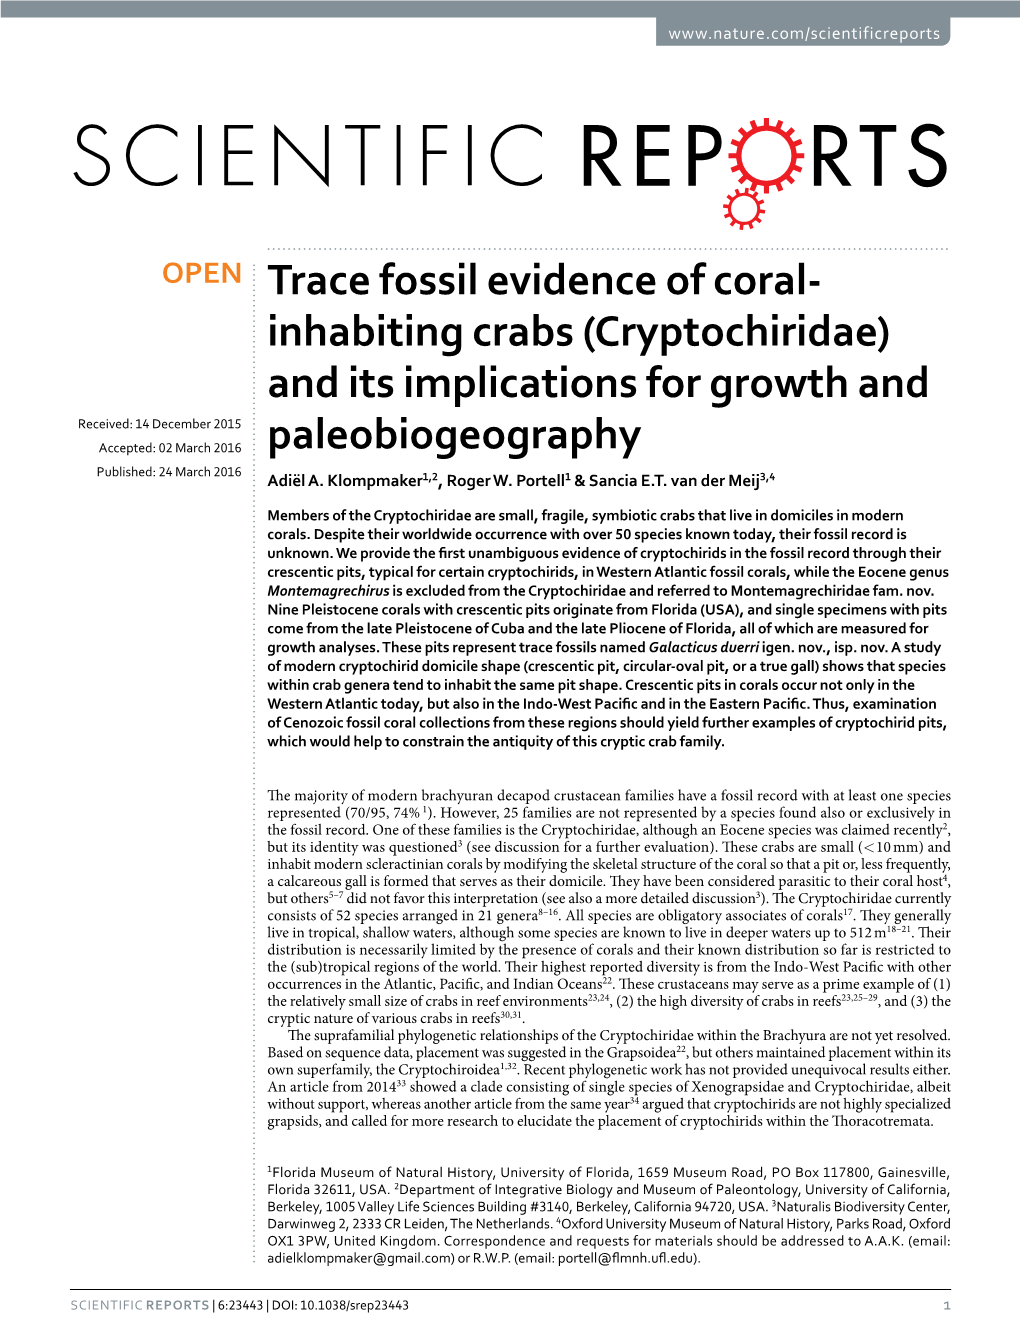 Cryptochiridae) and Its Implications for Growth and Received: 14 December 2015 Accepted: 02 March 2016 Paleobiogeography Published: 24 March 2016 Adiël A